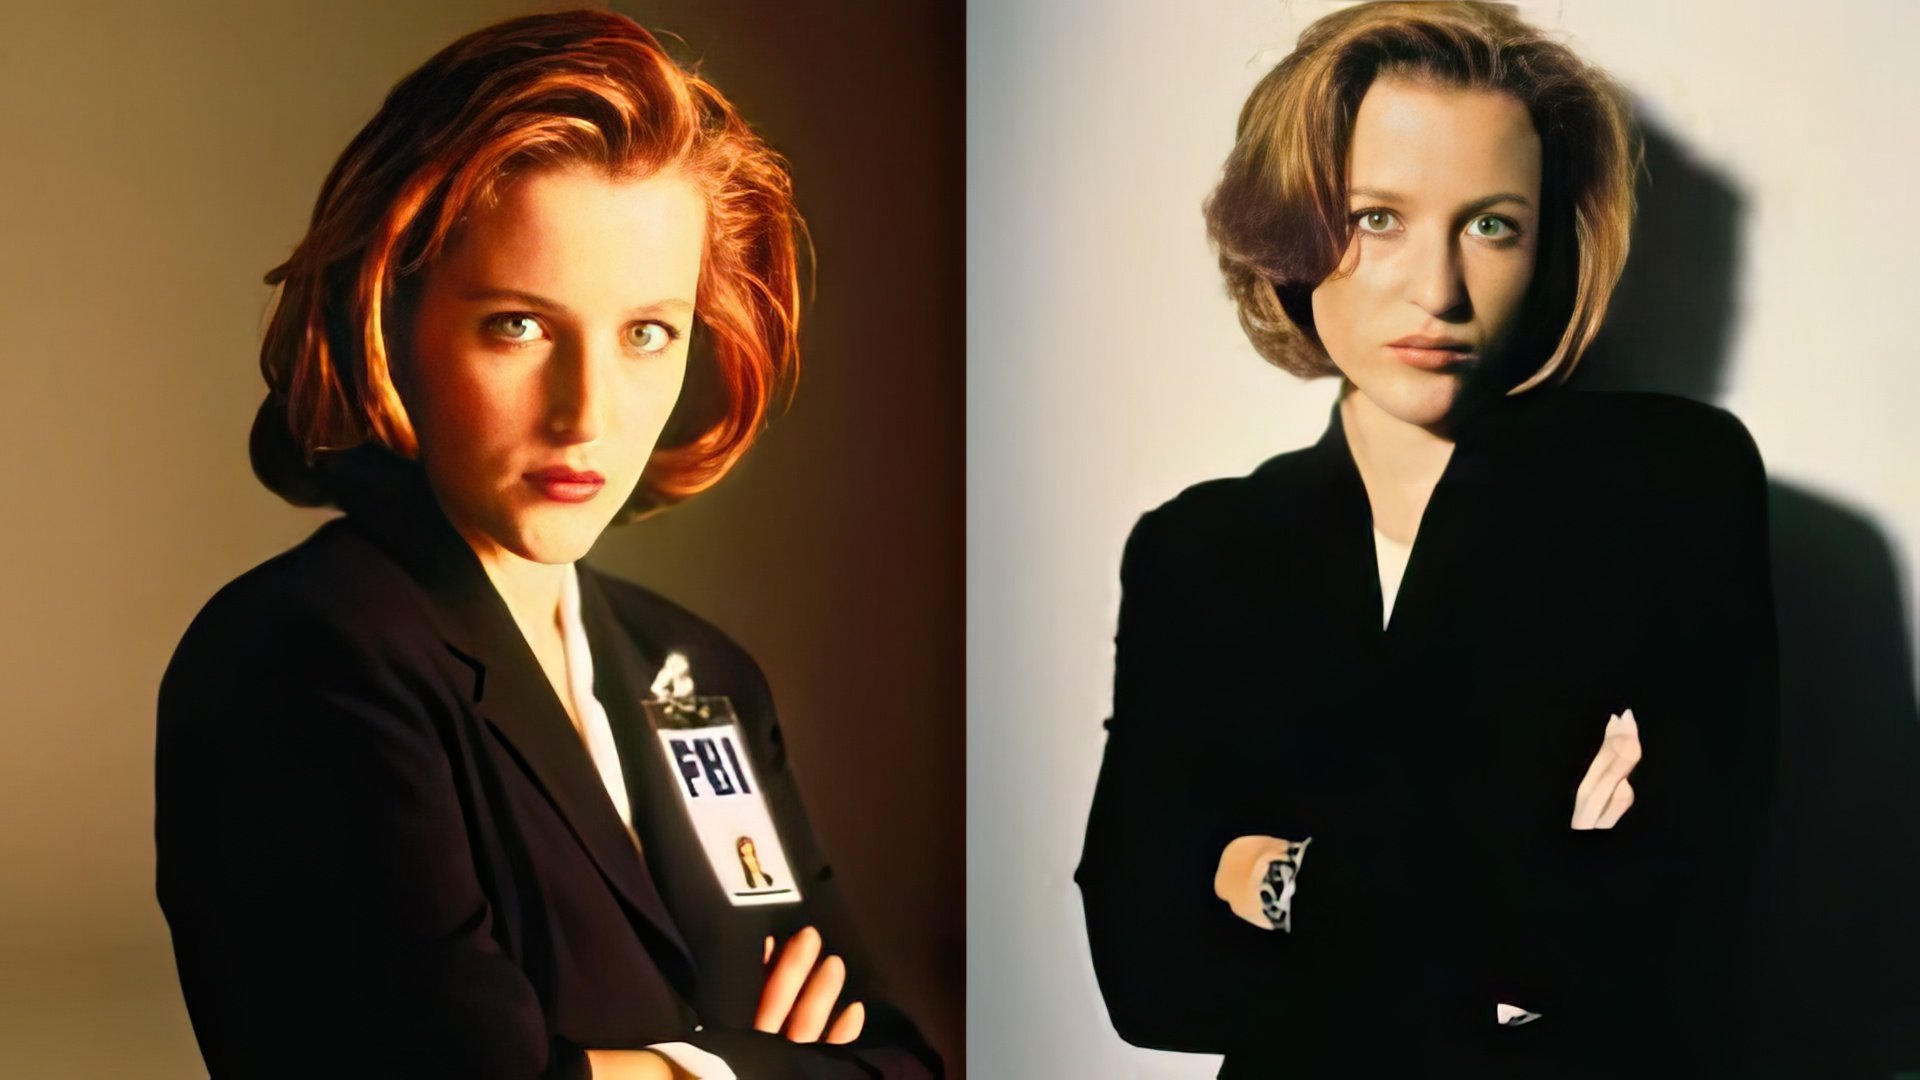 Such Gillian Anderson was remembered by millions of viewers